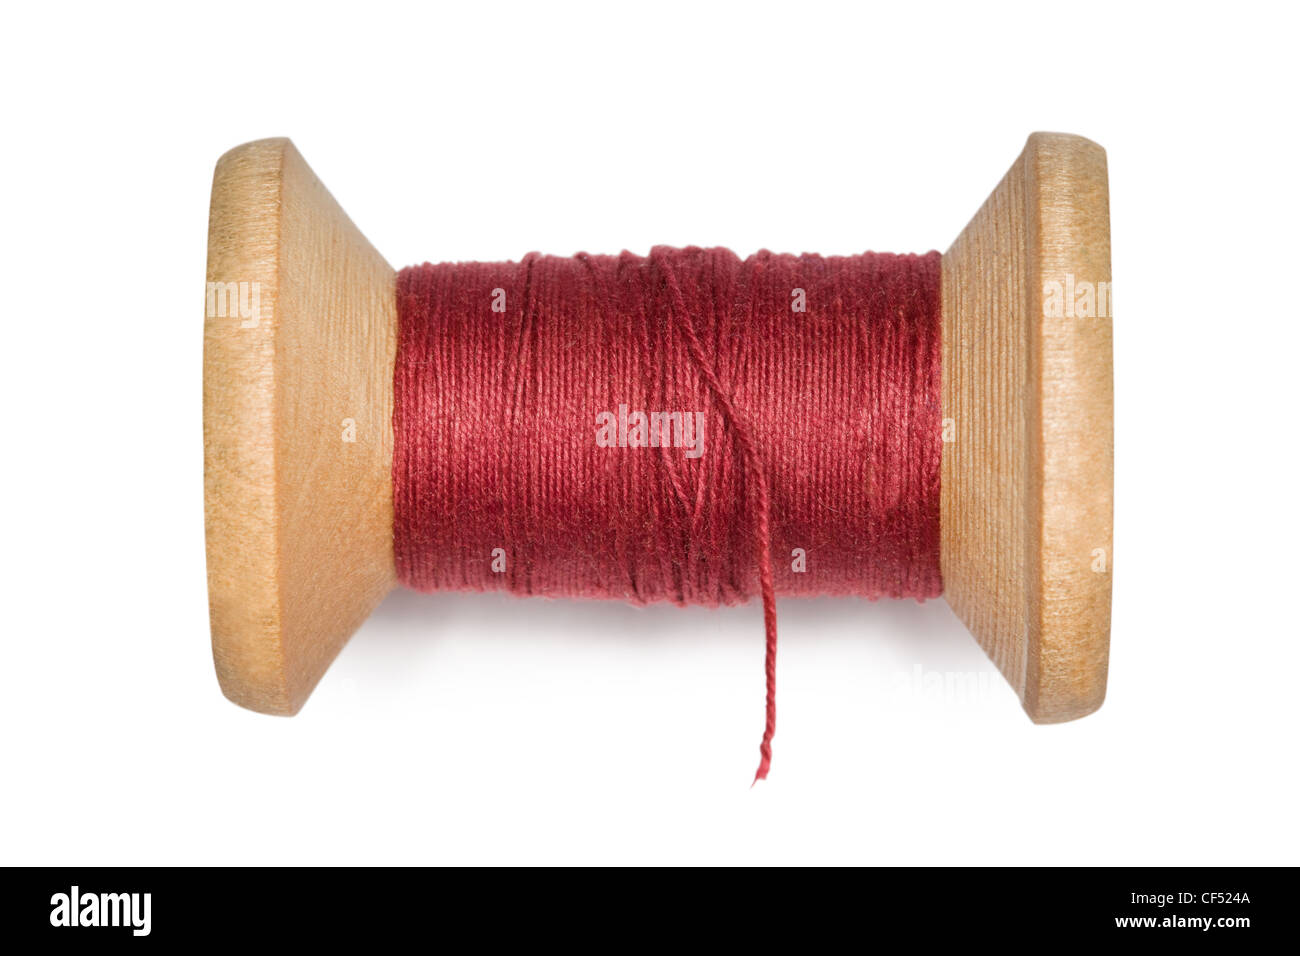 wooden coil with red threads isolated on white background Stock Photo